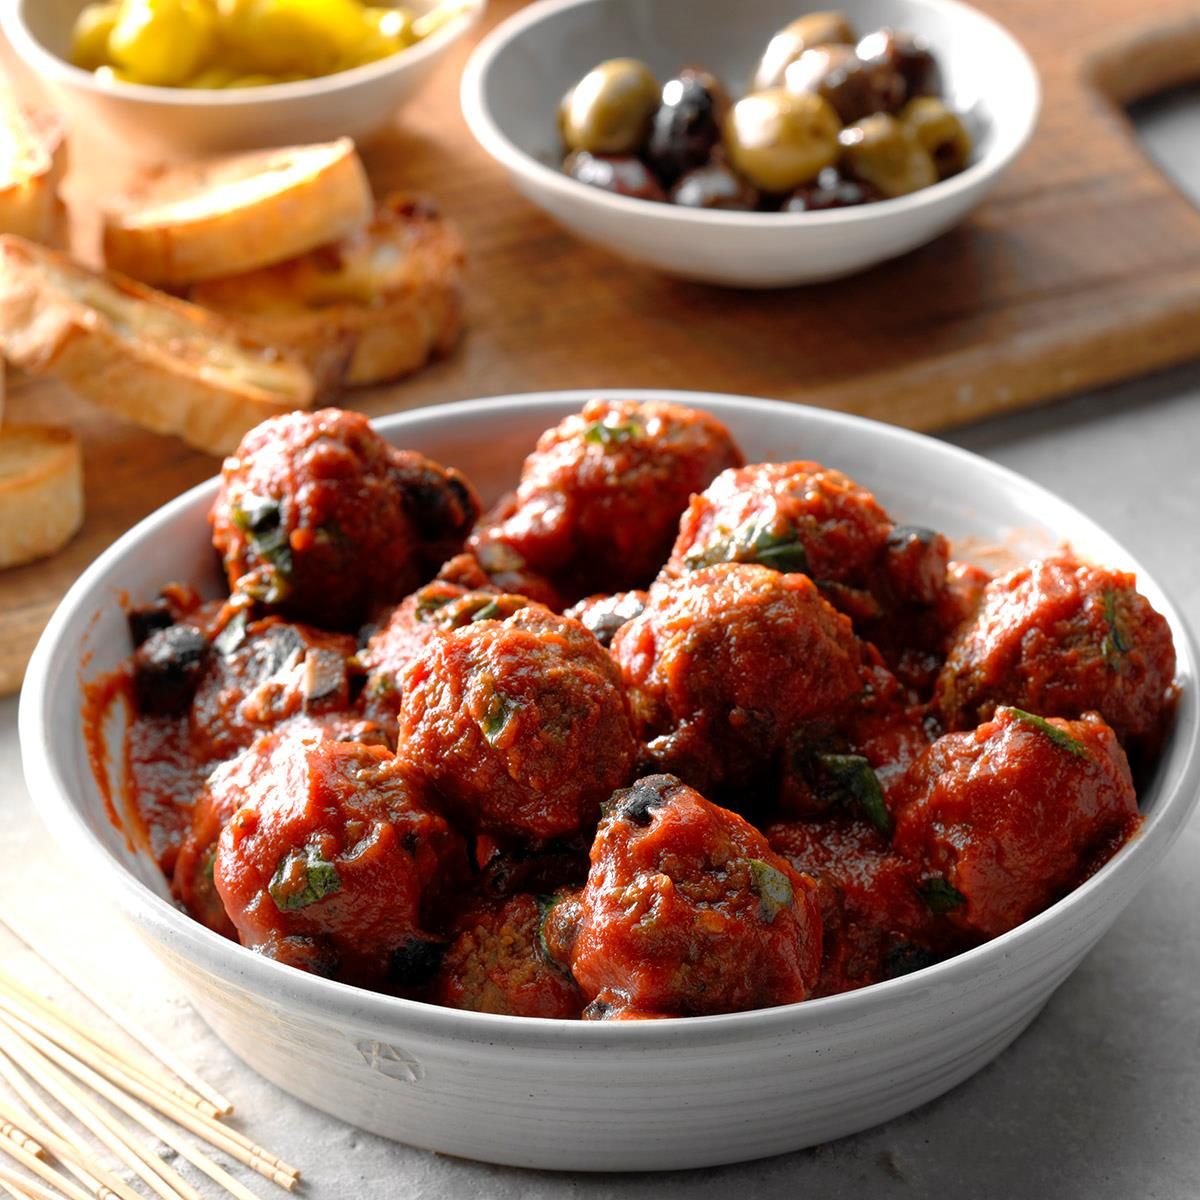 56 Meatball Recipes We Can't Get Enough Of | Taste of Home